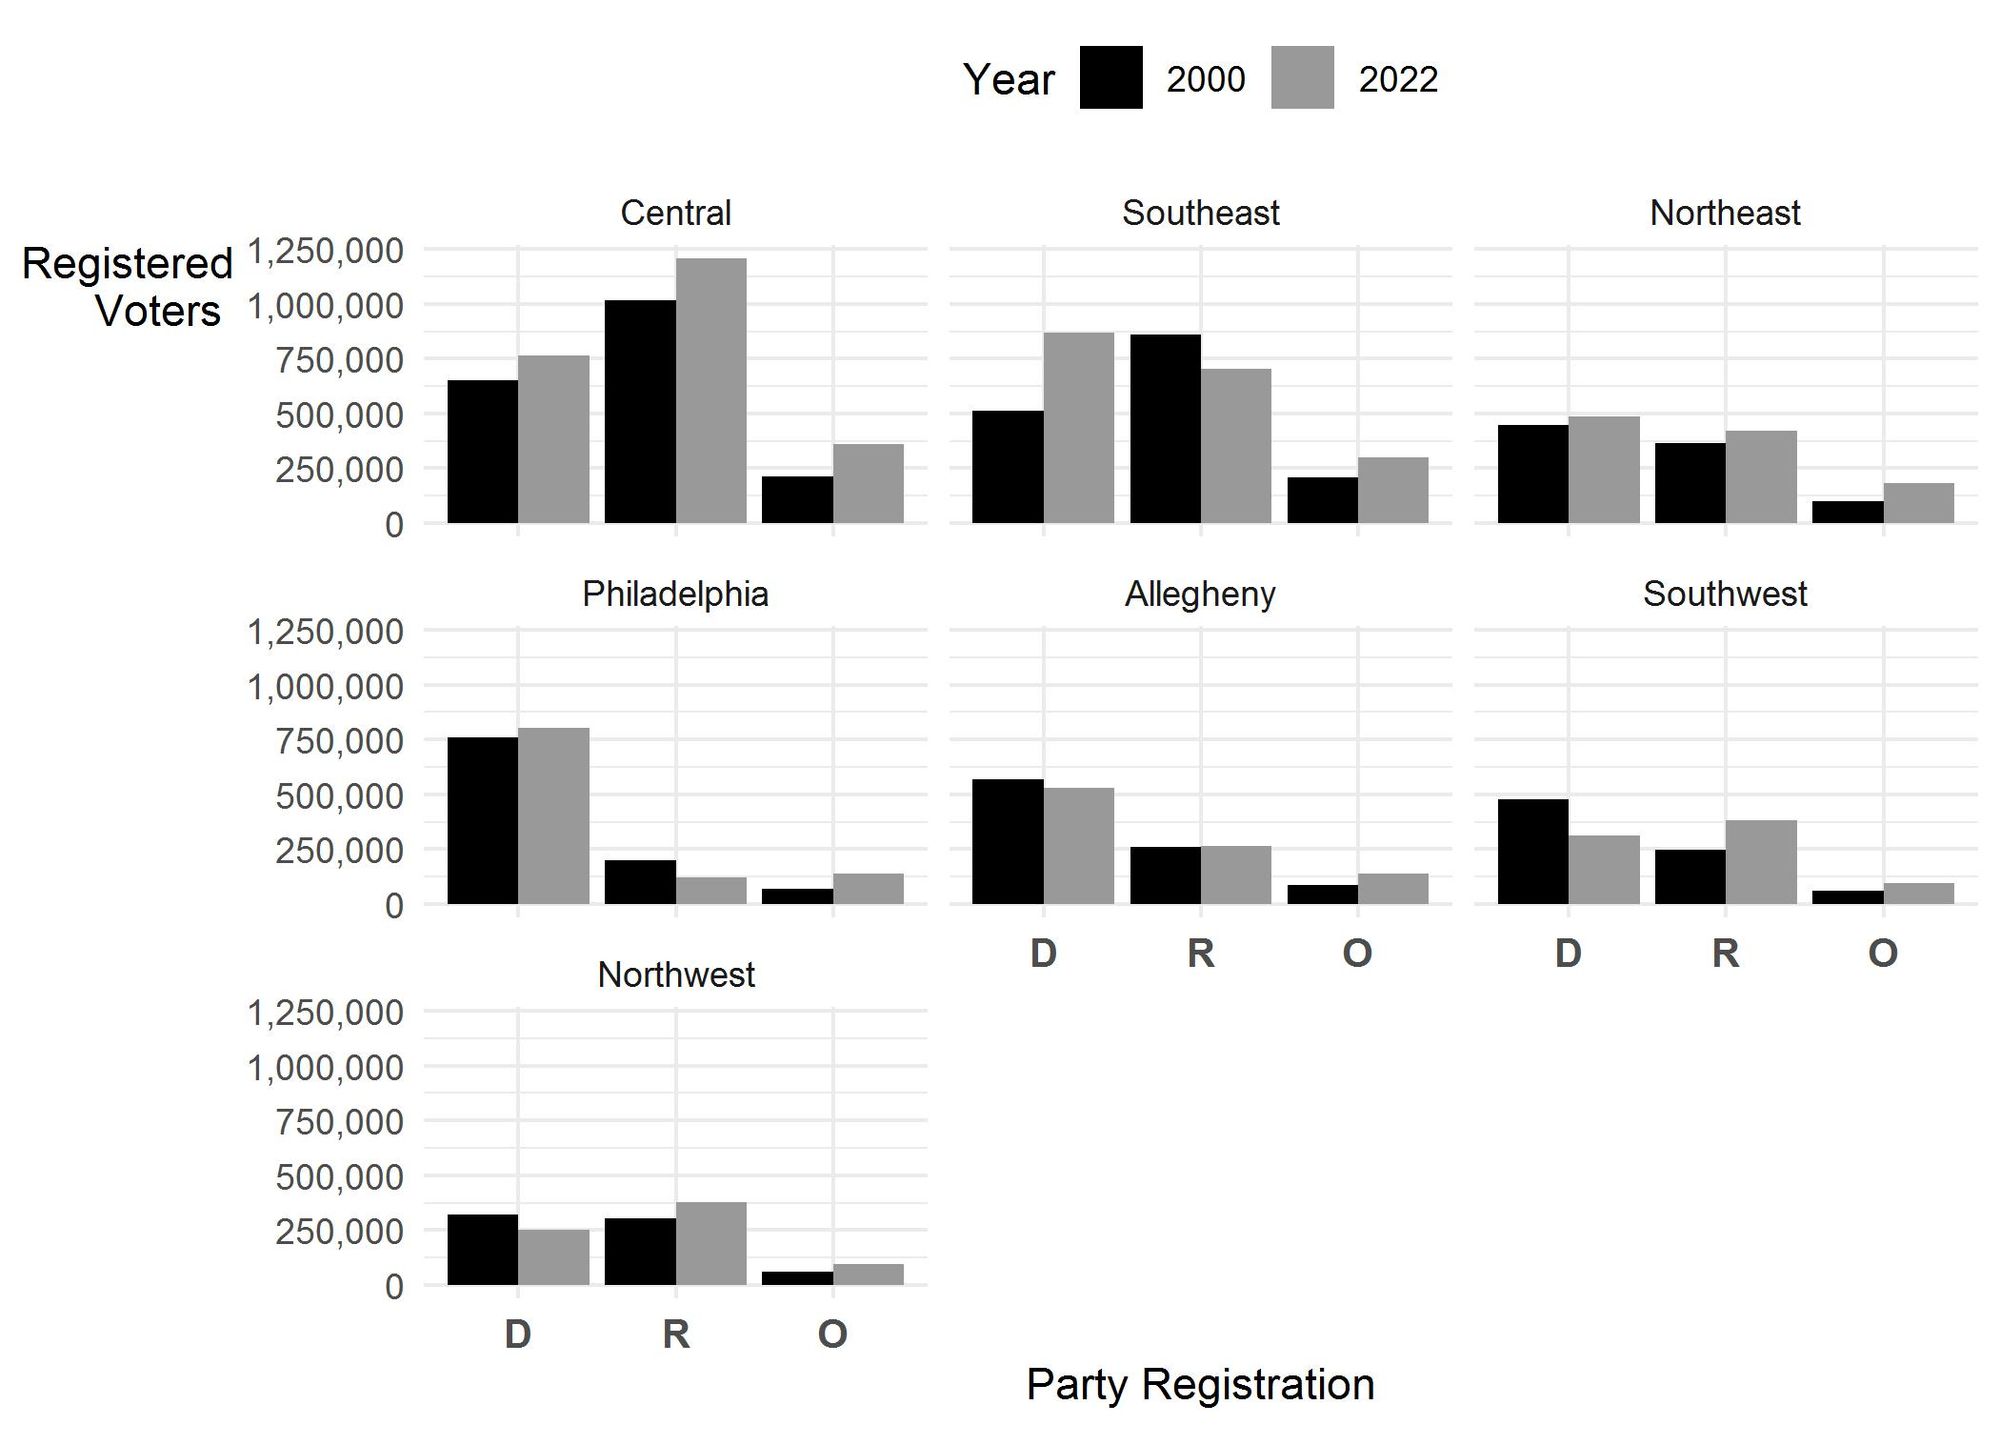 Figure 1. Seven bar graphs show the regional voter registration figures by party for seven areas of Pennsylvania in 2000 and 2022. Regions are ordered from largest to smallest by the number of registered voters in each. Left-most bar in each regional panel represents Democrat registration, center bar represents Republican registration, and right-most bar represents other party registration.